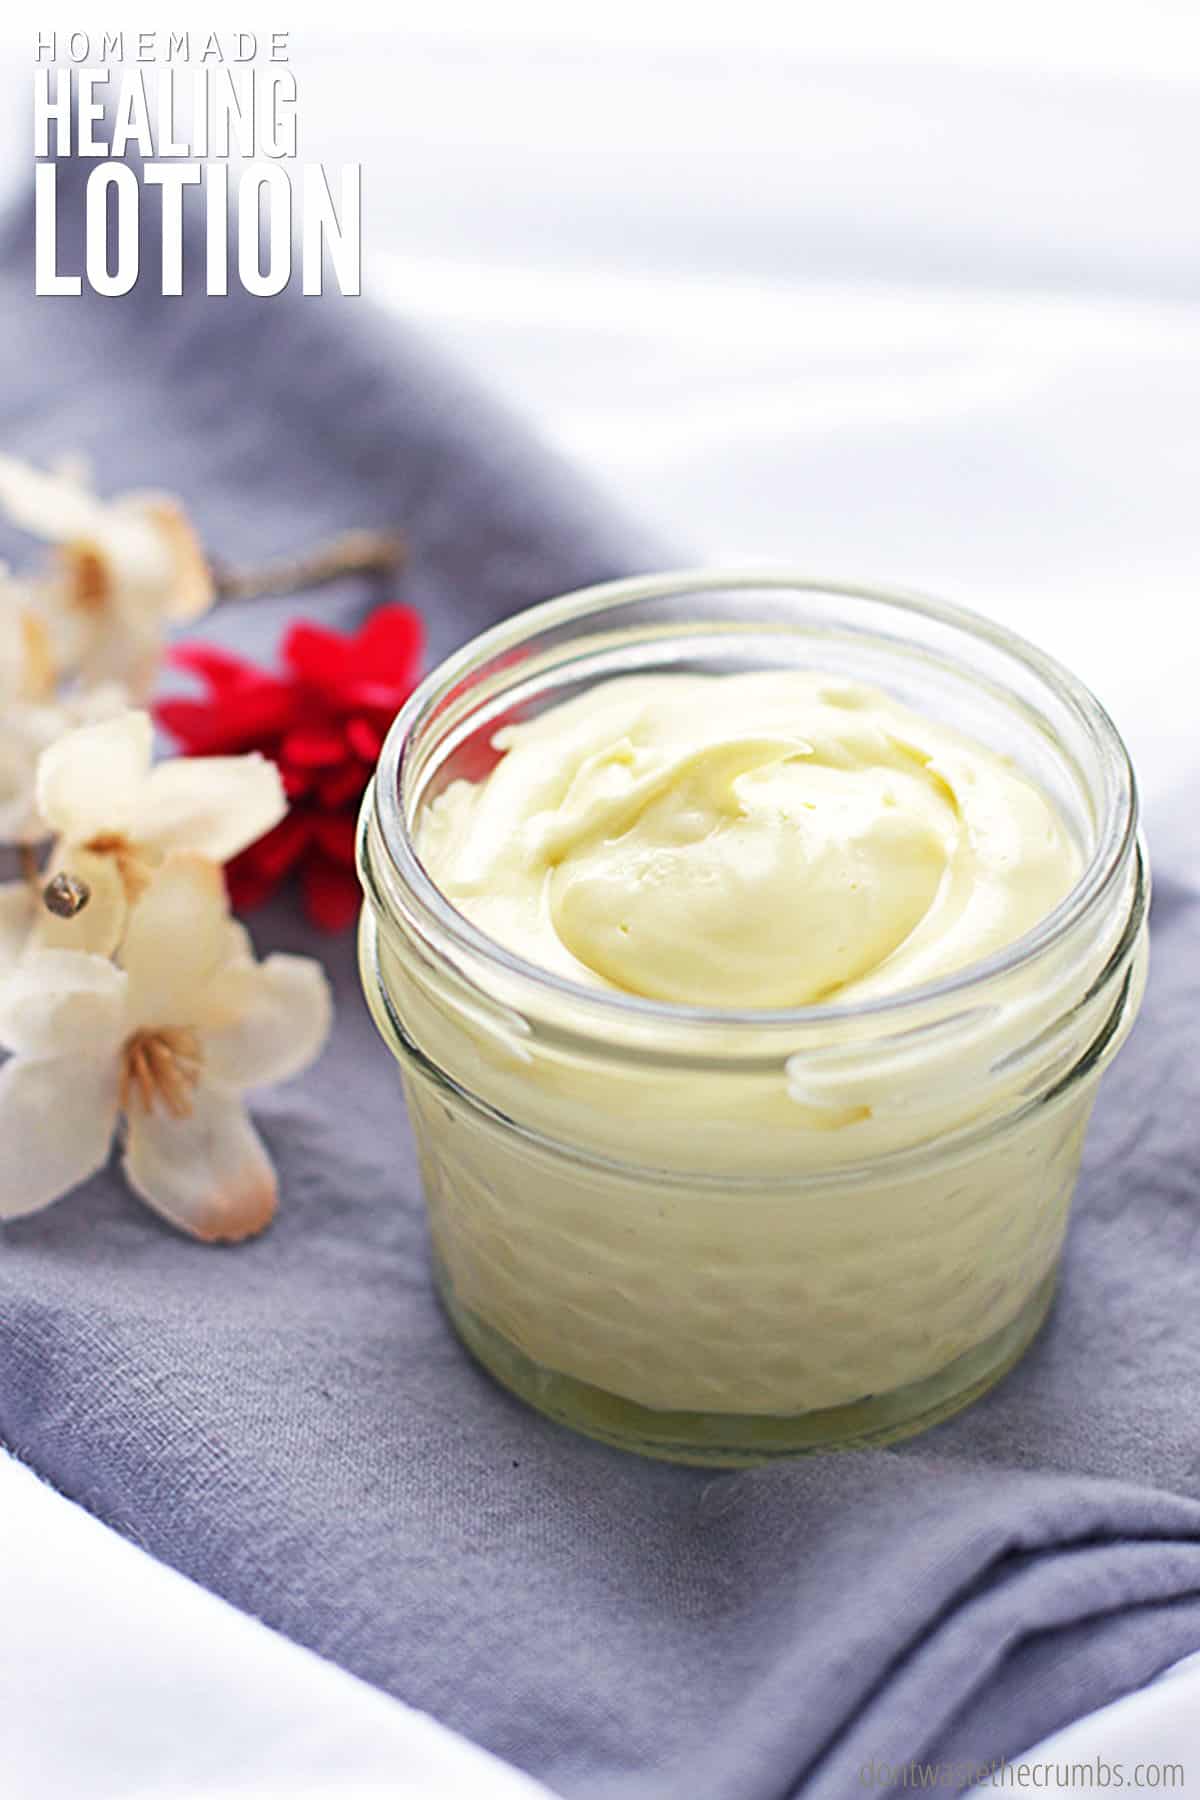 Homemade healing lotion is an amazing way to heal very dry and cracked skin. Here is the perfect recipe for homemade lotion.